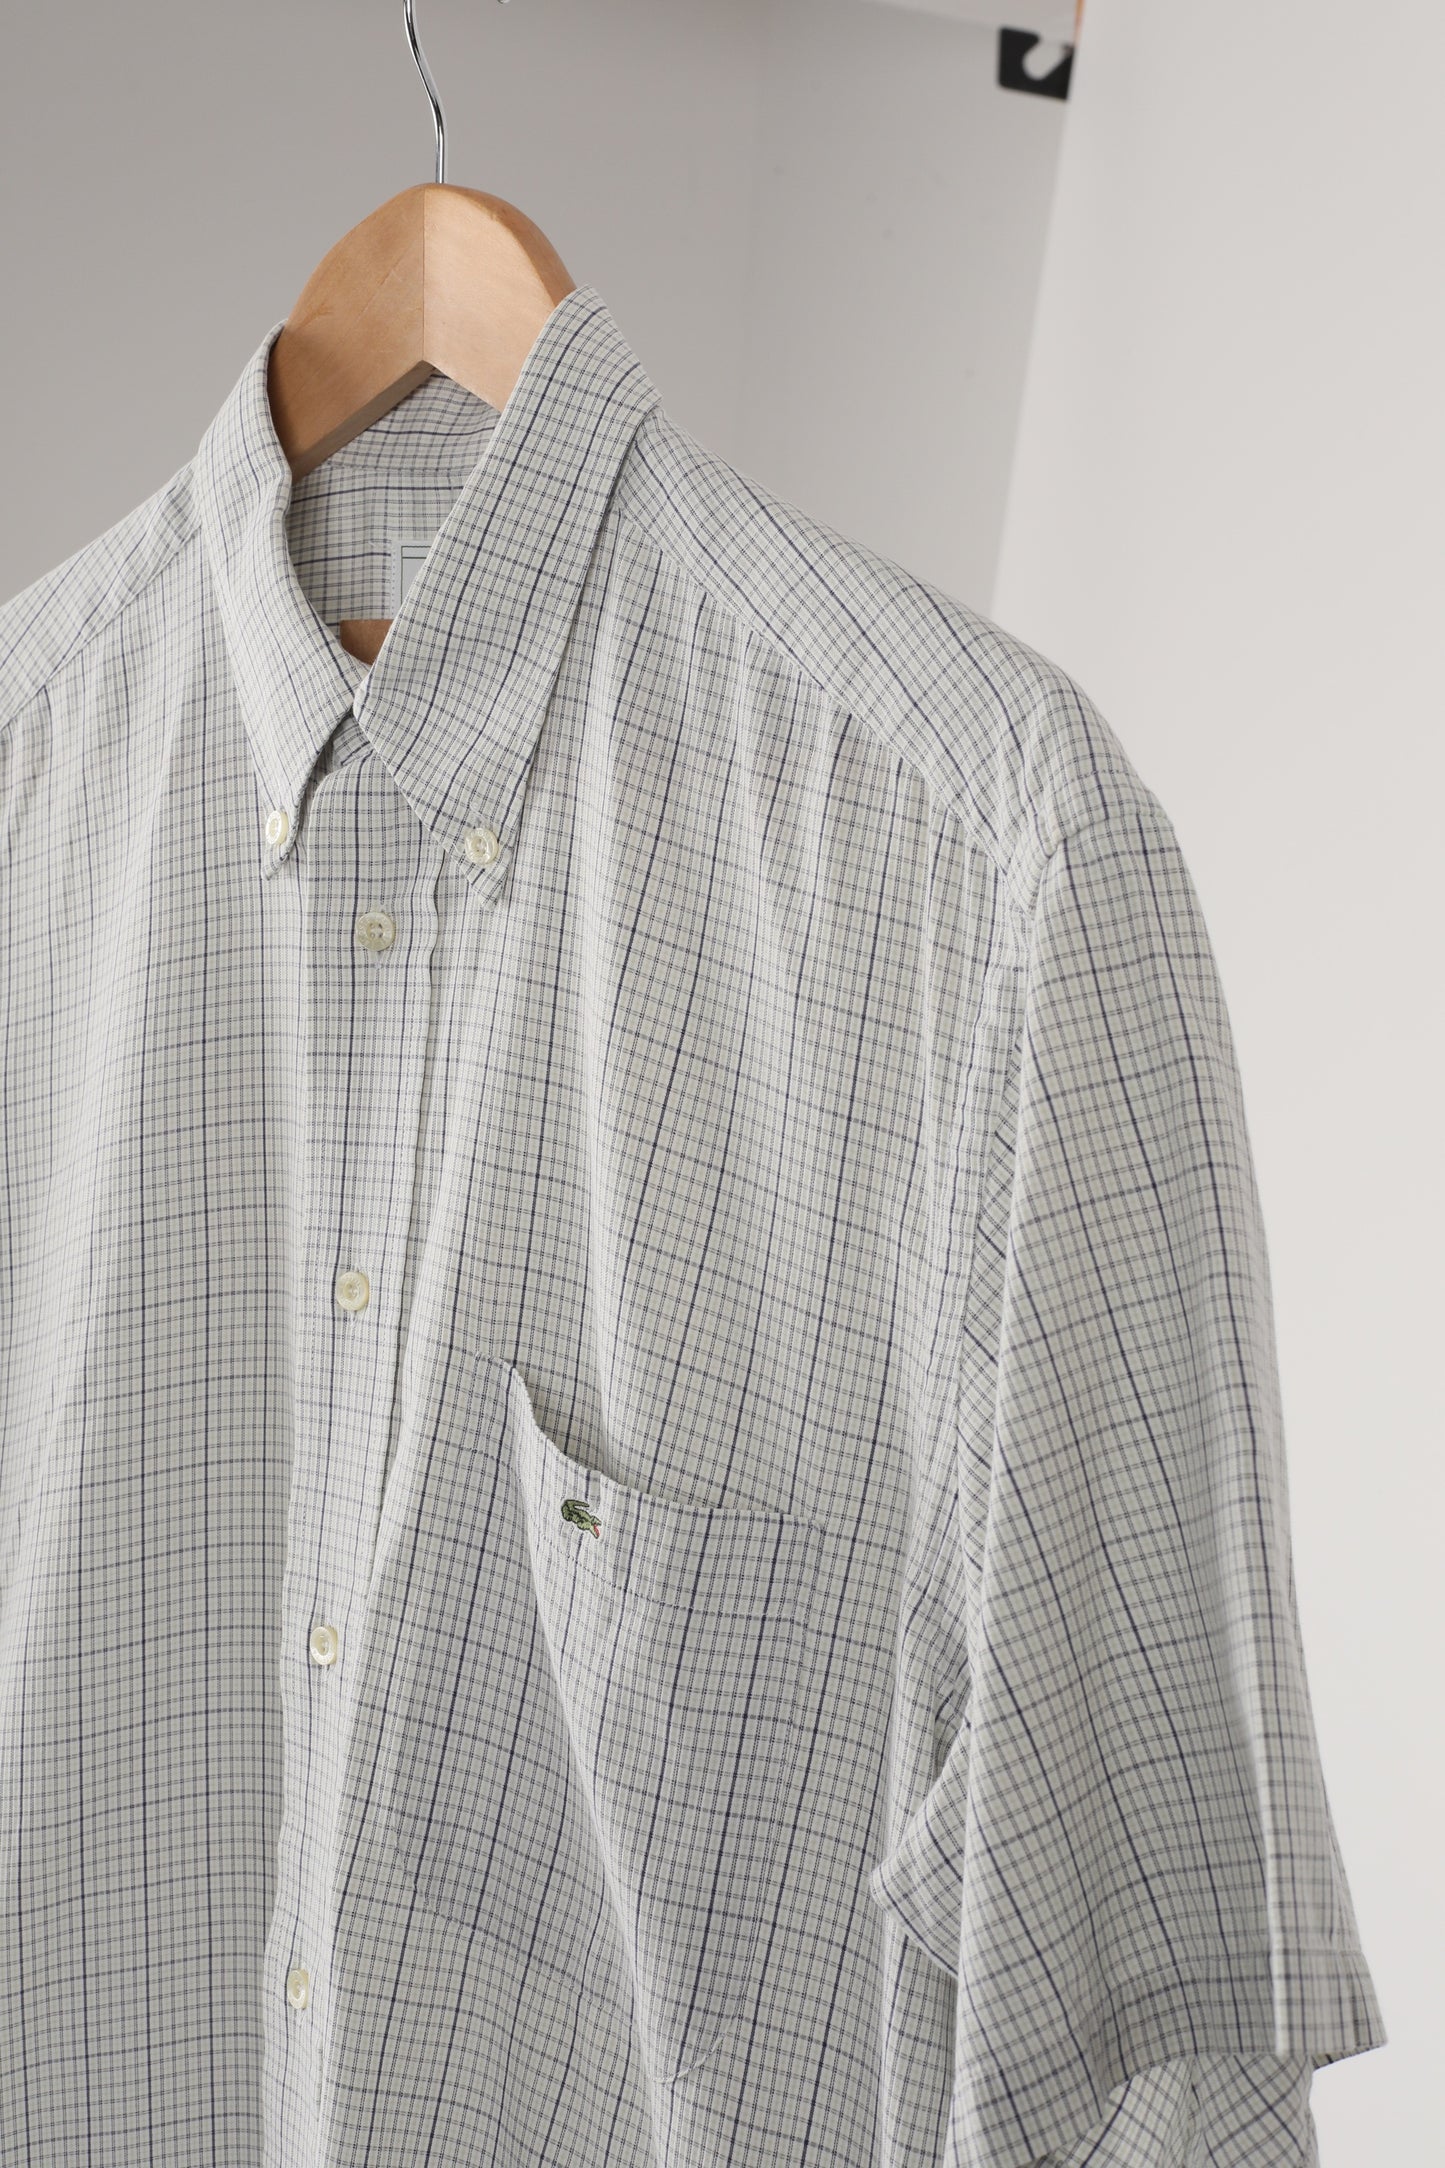 90s lacoste checked short sleeve Oxford shirt (40)